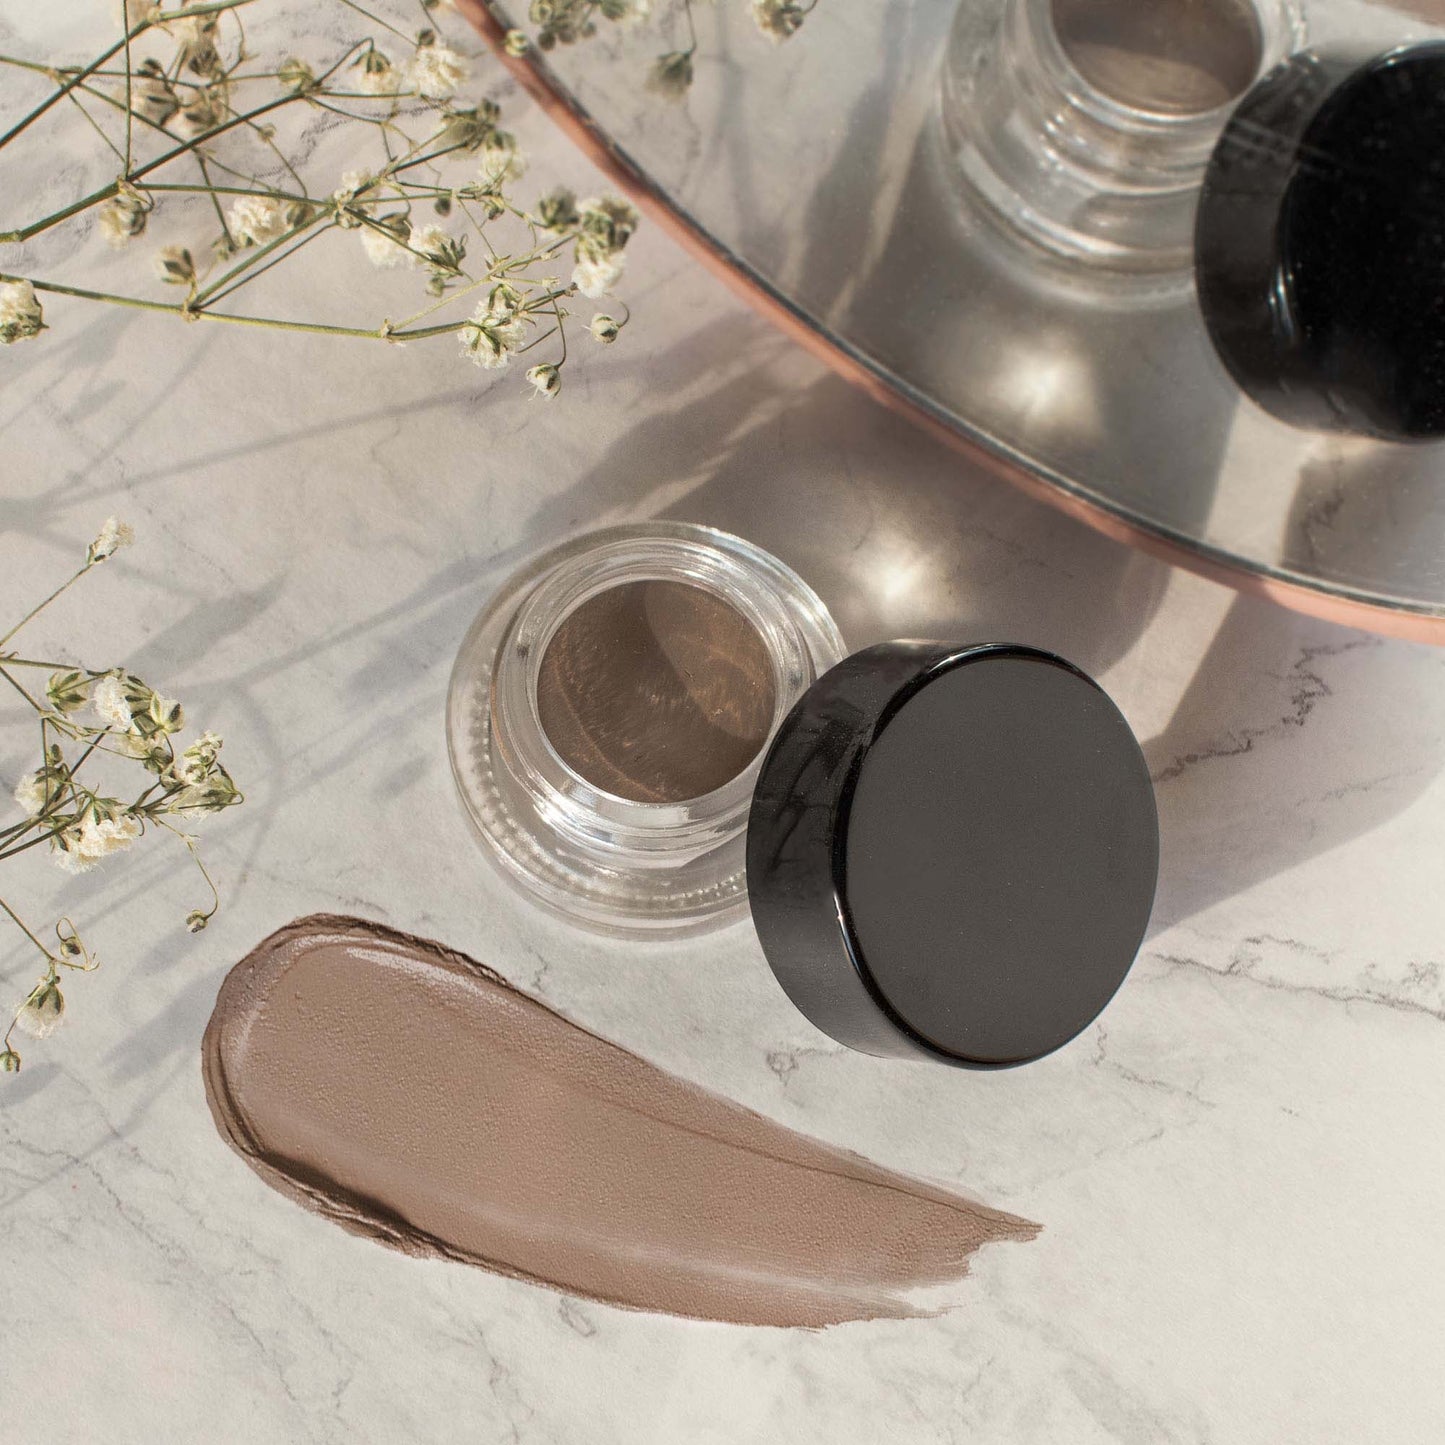 Achieve perfect brows every time with Auburn Brow Pomade from Cruisin Organics. This versatile, multitasking product precisely shapes, fills, and sculpts brows, even for oily skin.